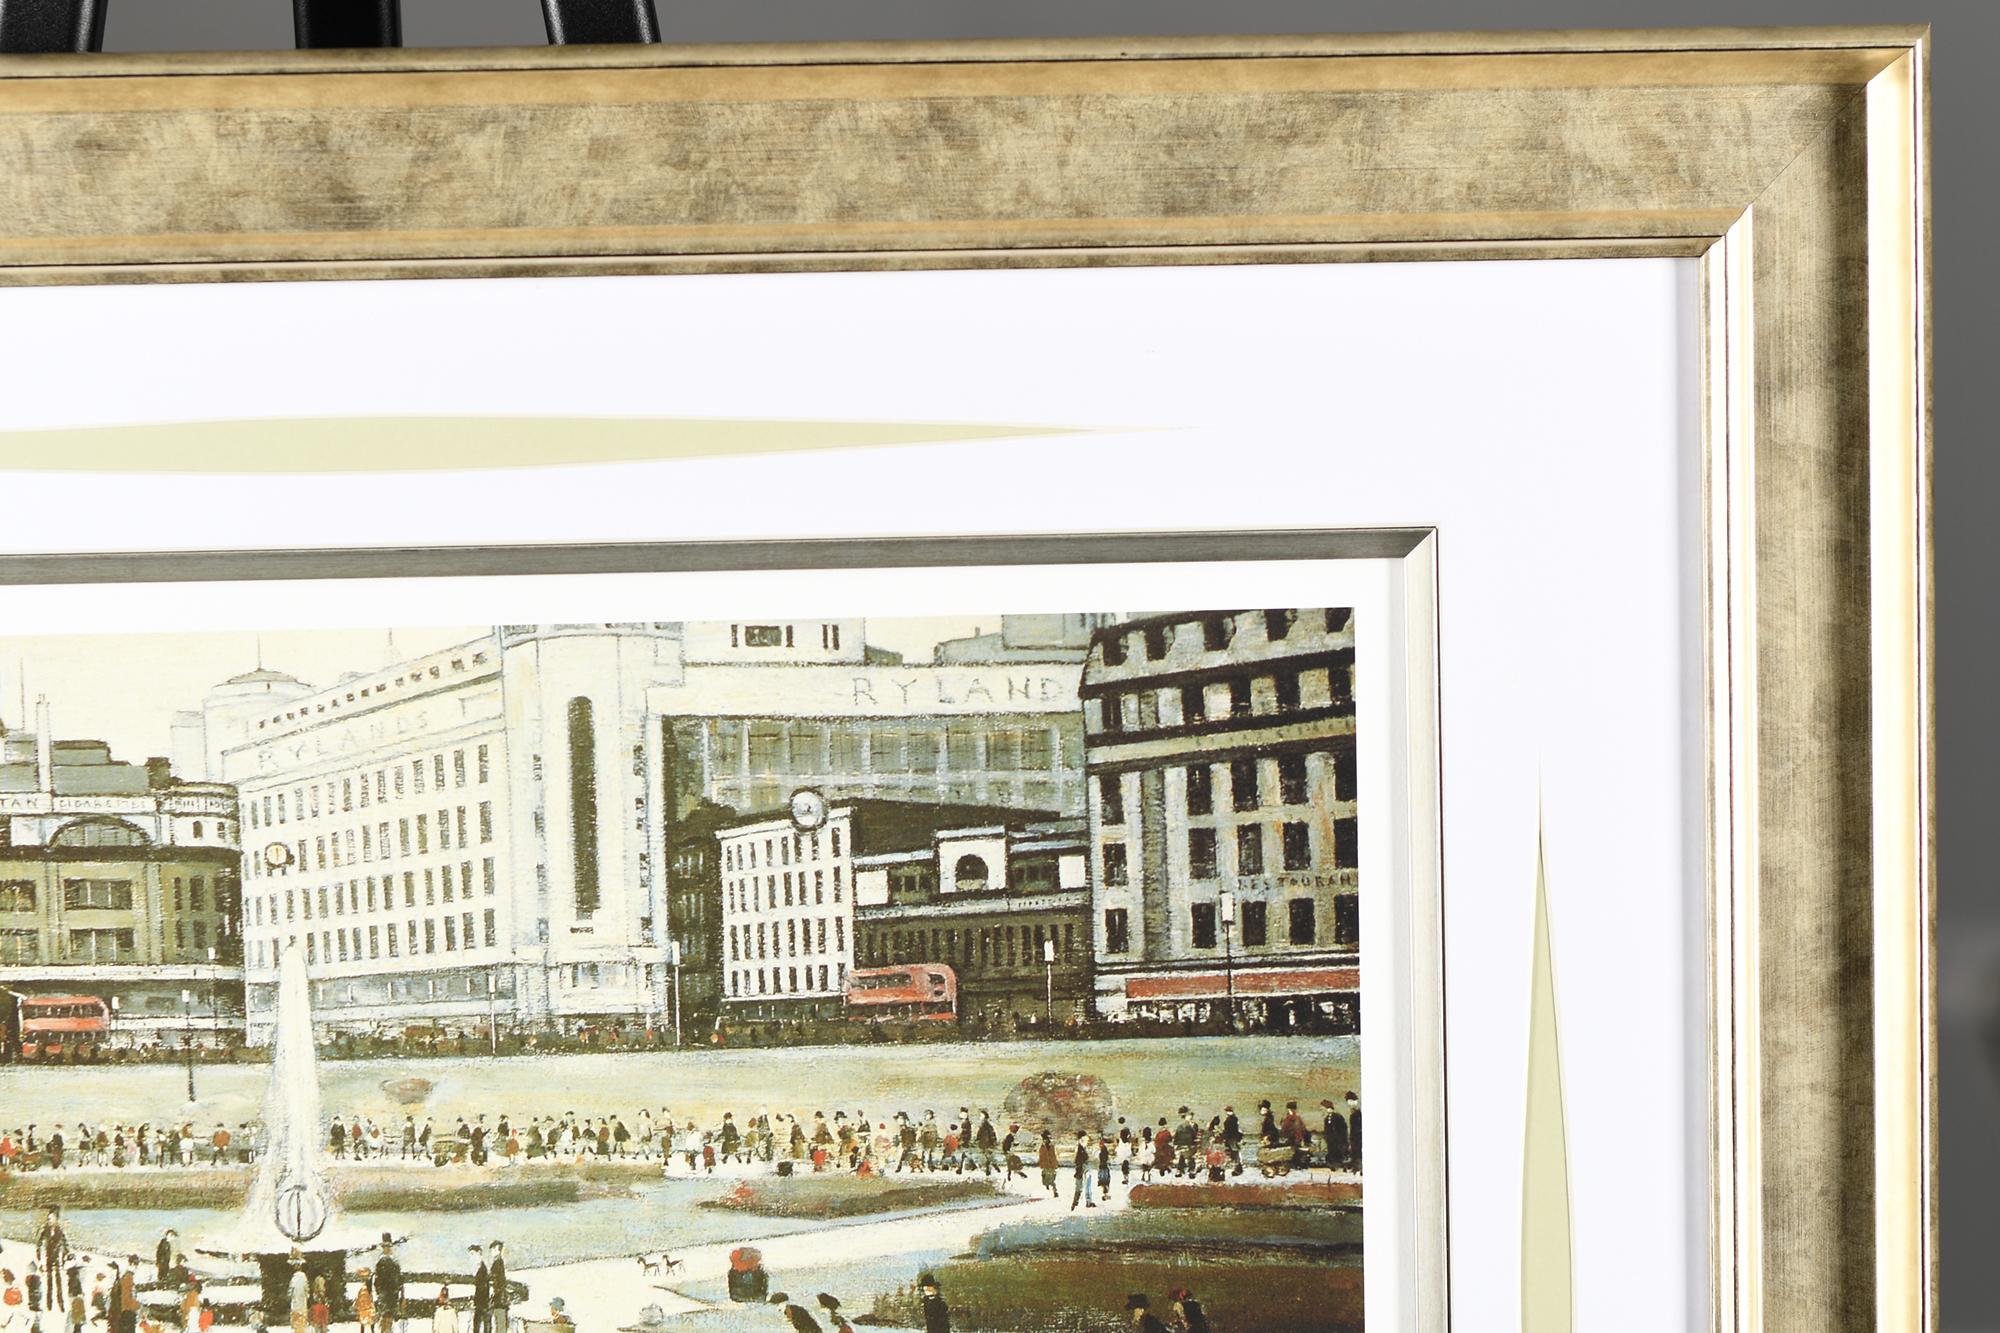 Limited Edition L.S. Lowry "Piccadilly Gardens" Authentication & Embossed Stamped. Mint Condition. - Image 7 of 10